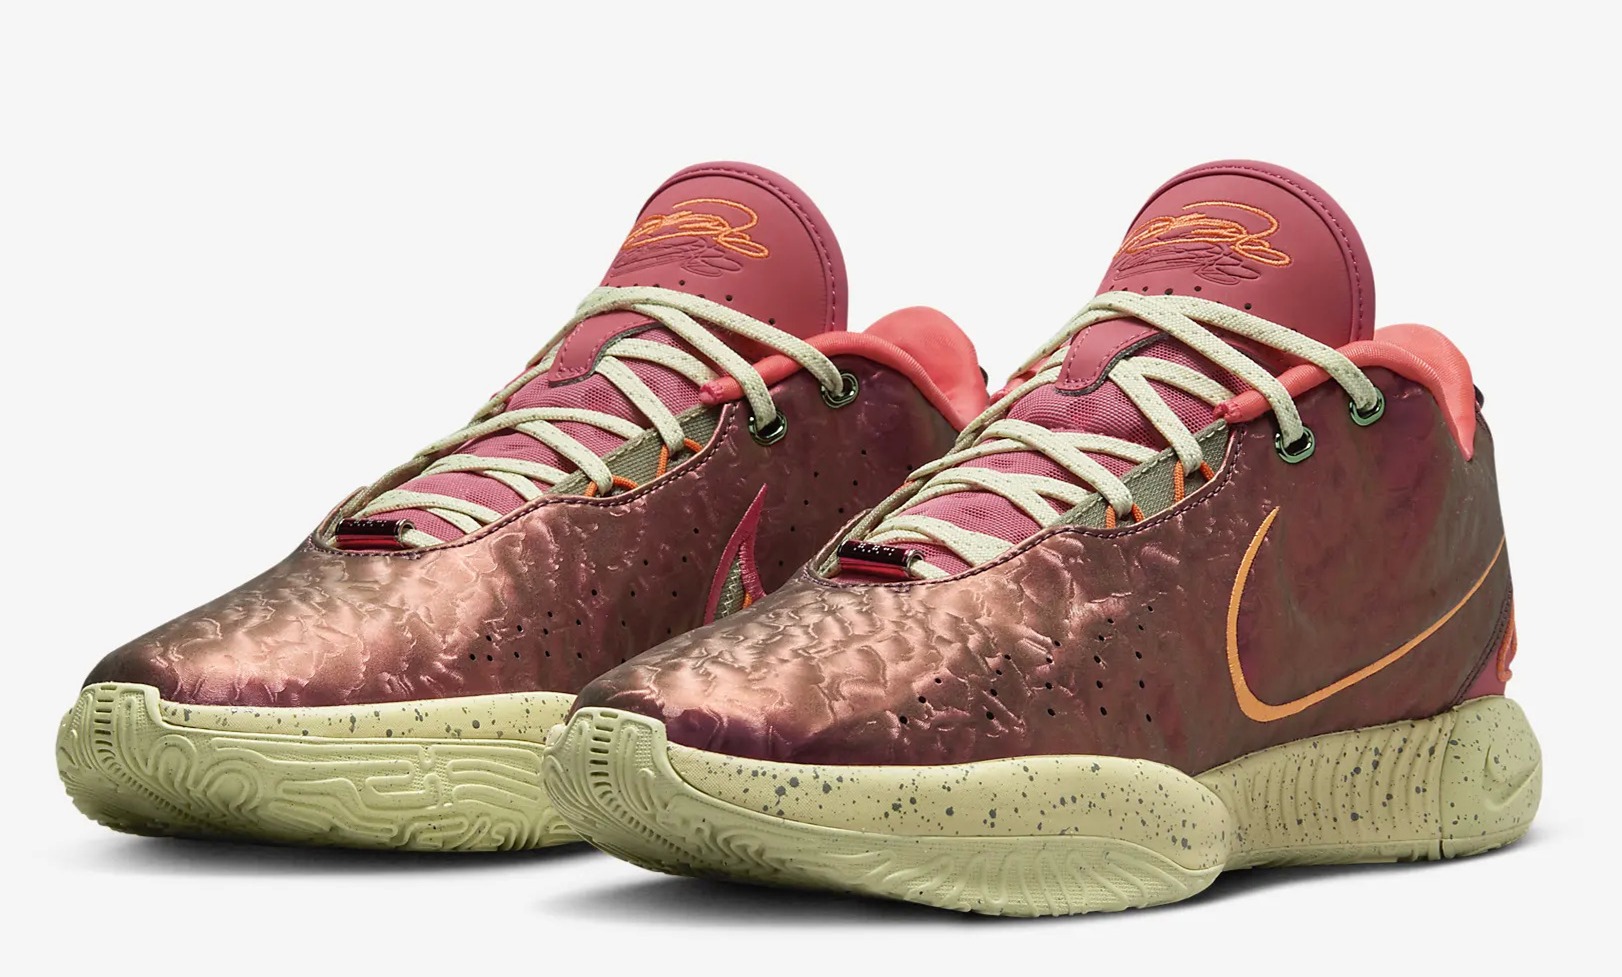 Nike.com LeBron XXI "Queen Conch" Basketball Shoes 50% off for $99.97